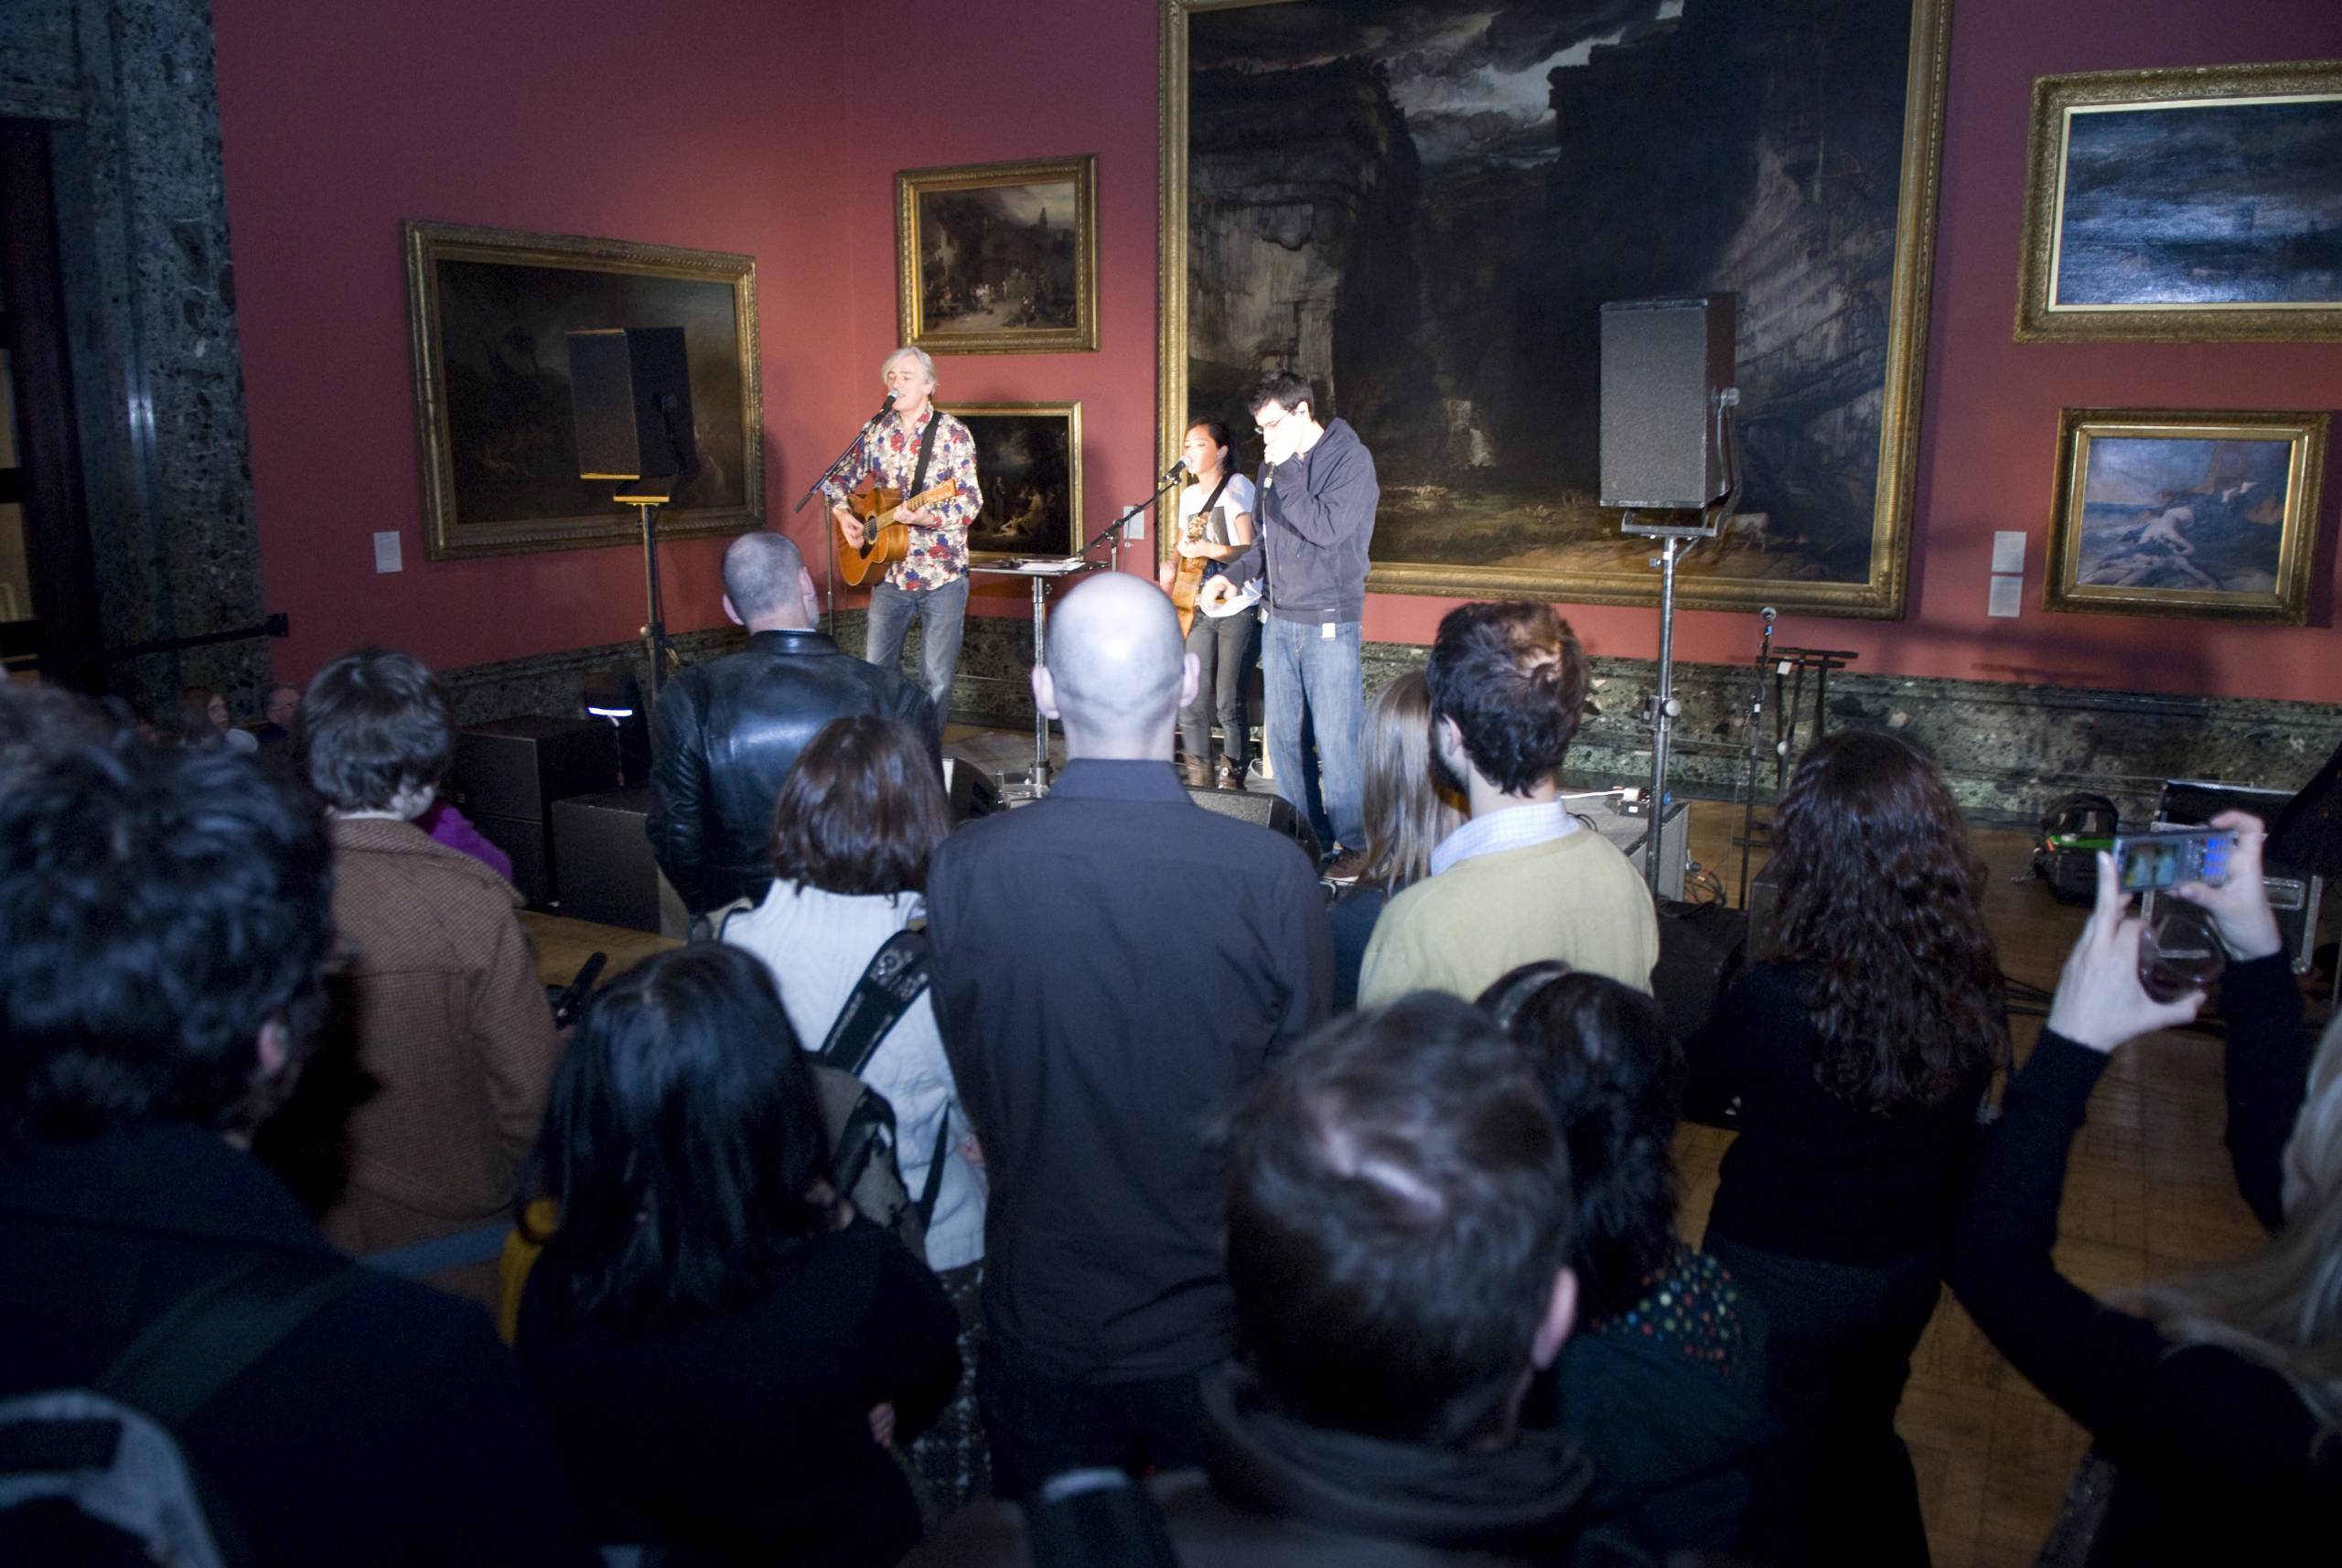 musicians perform in a gallery setting